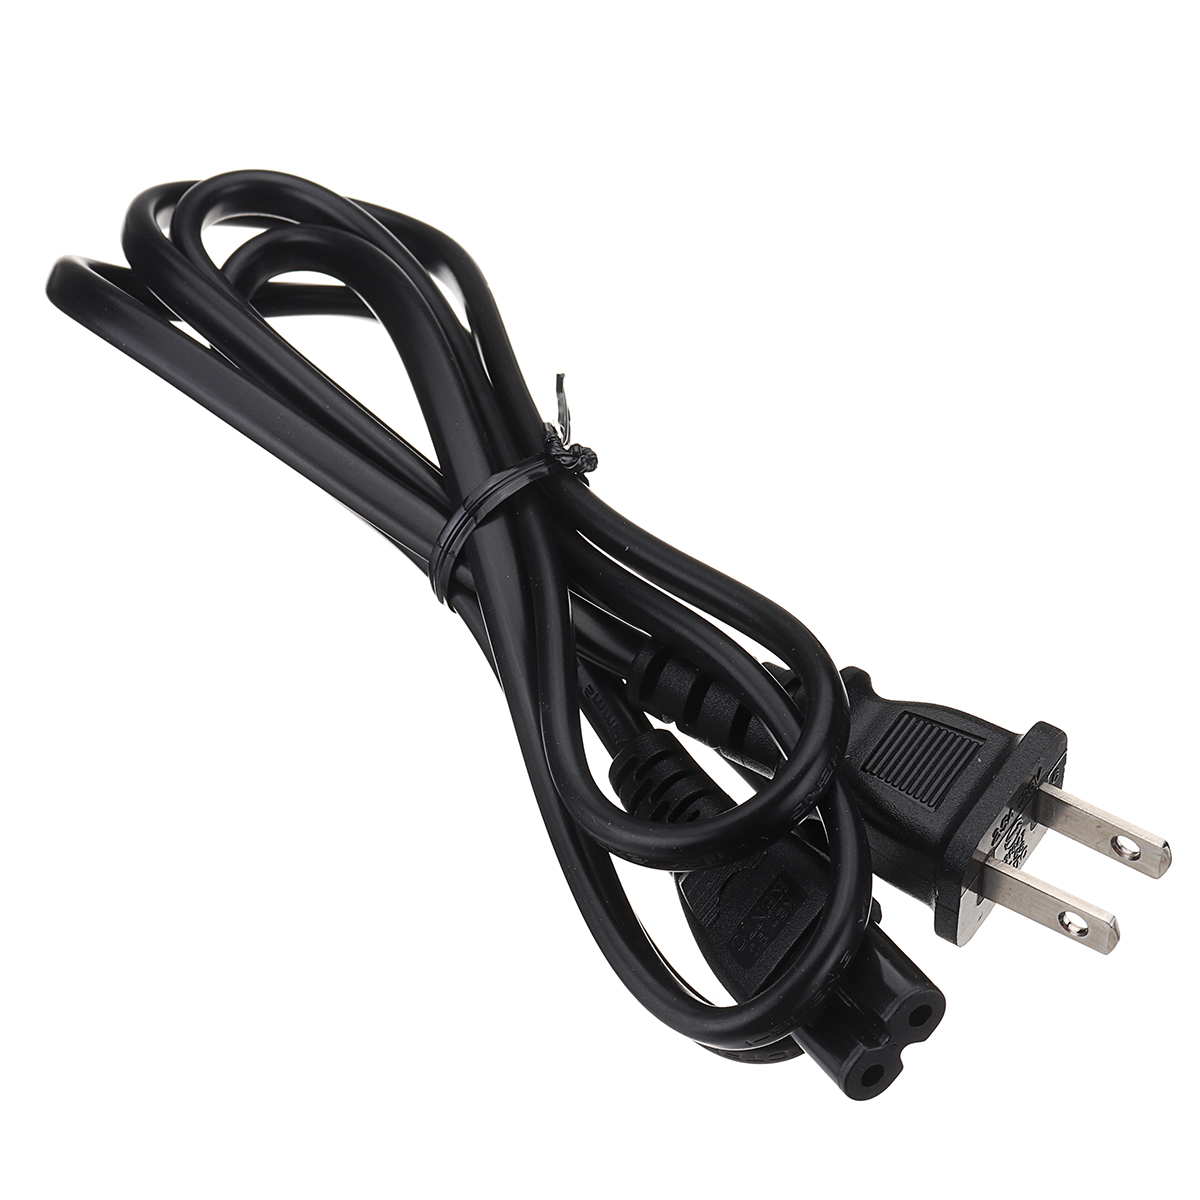 Find Kinect 2.0 Sensor USB 3.0 Power Adapter Cable For Xbox One S X Windows 8 8.1 10 for Sale on Gipsybee.com with cryptocurrencies